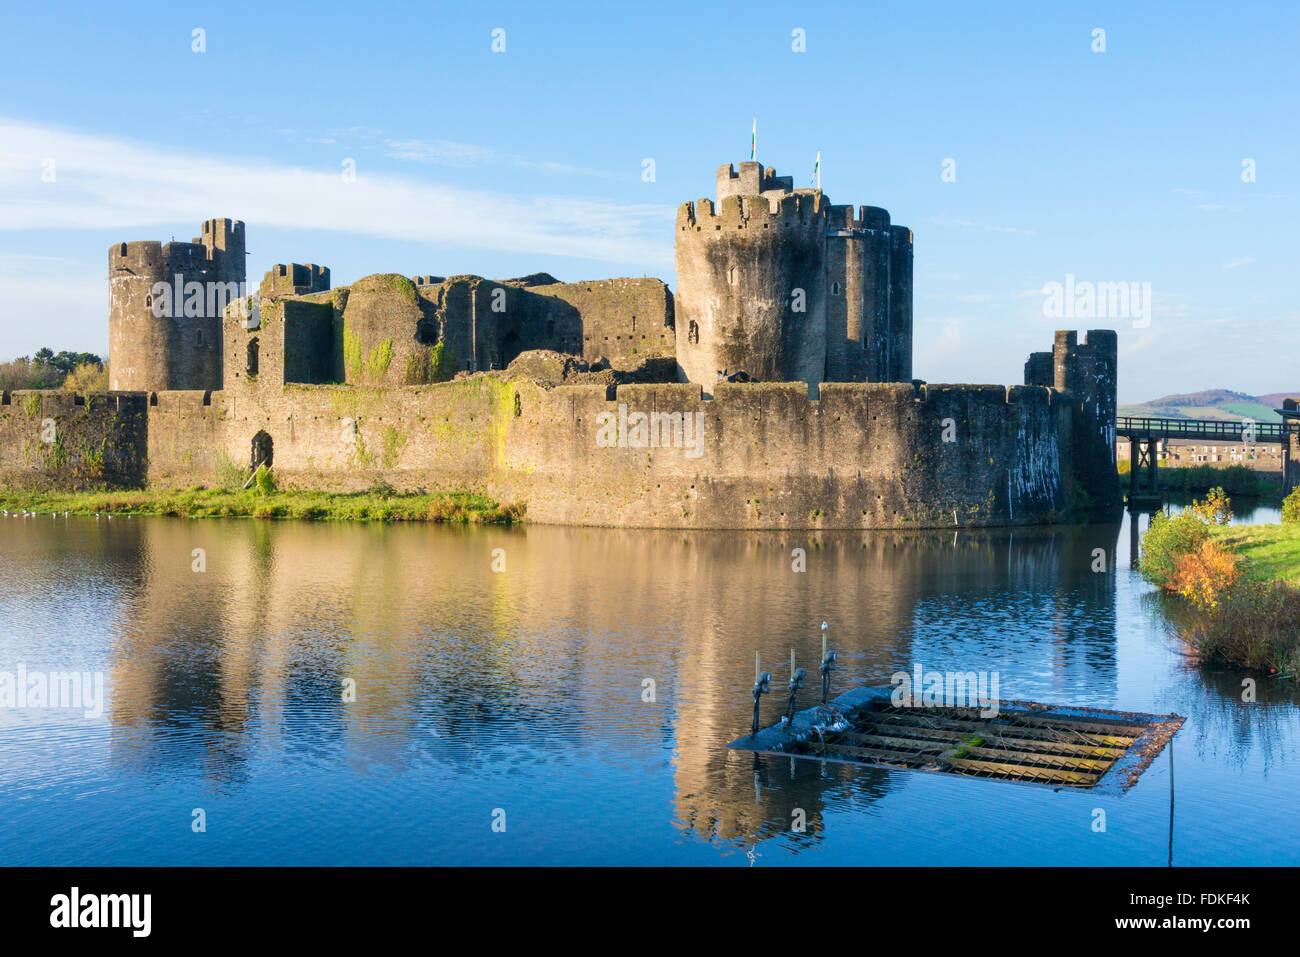 Caerphilly castle a Medieval castle with moat in Caerphilly Glamorgan South Wales GB UK EU Europe Stock Photo